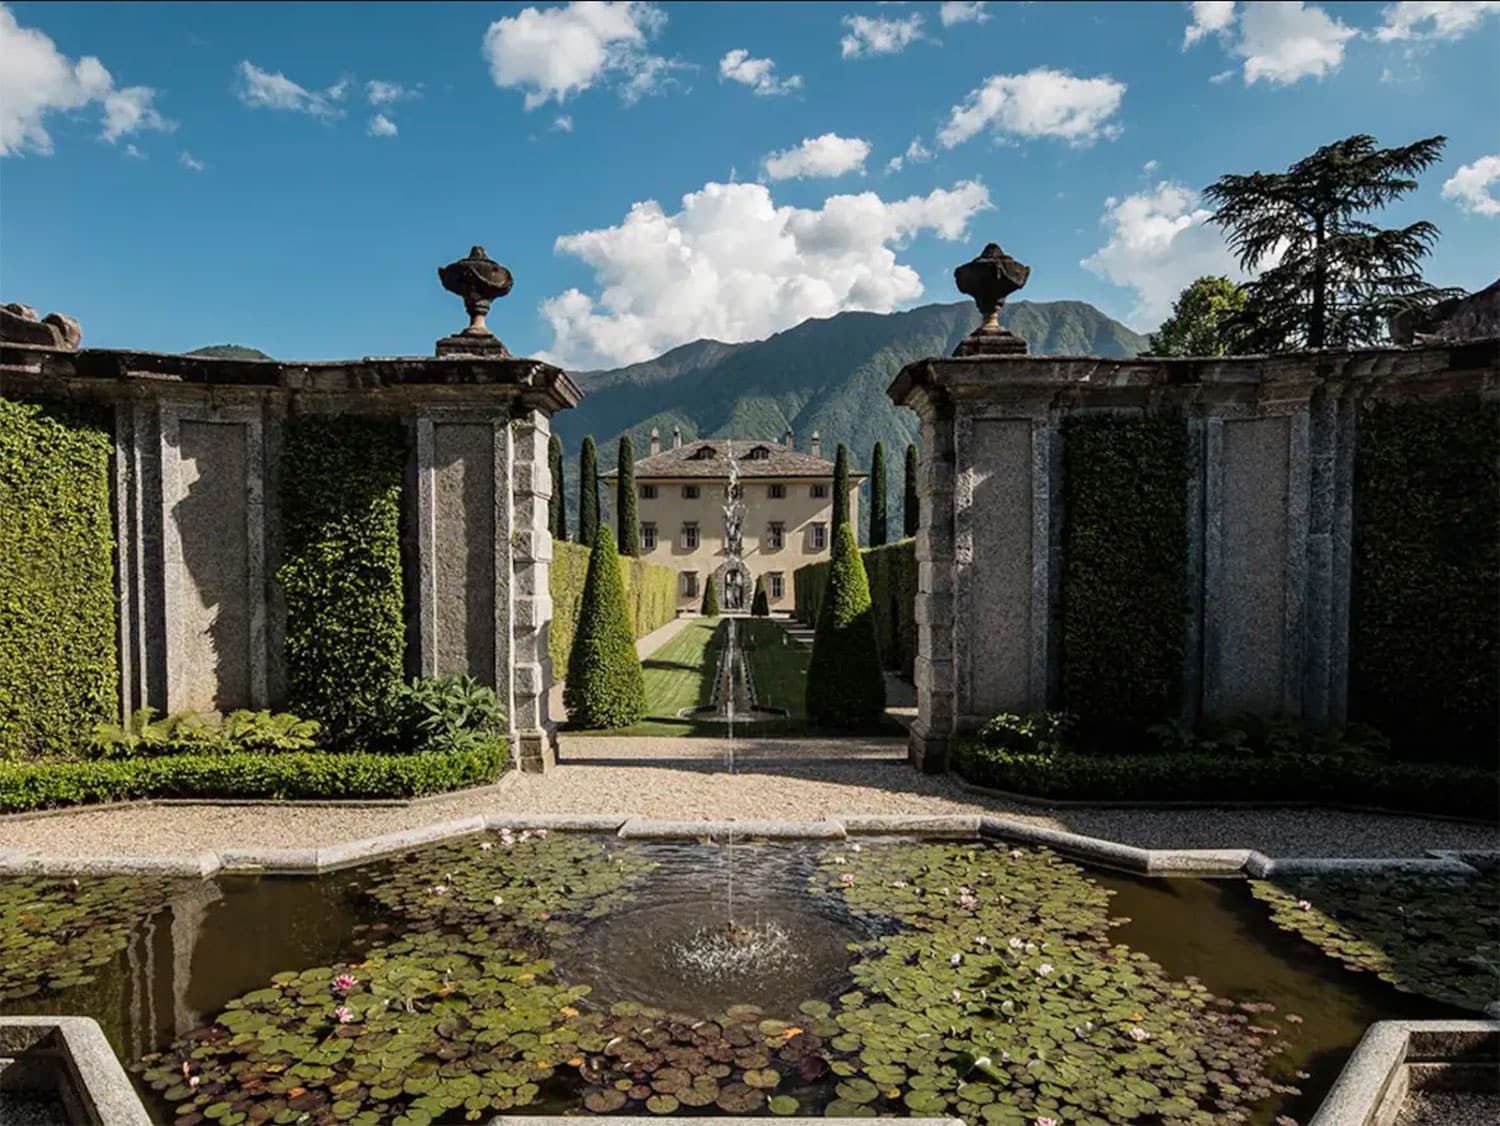 The vast, green gardens outside Villa Balbiano, the House of Gucci.